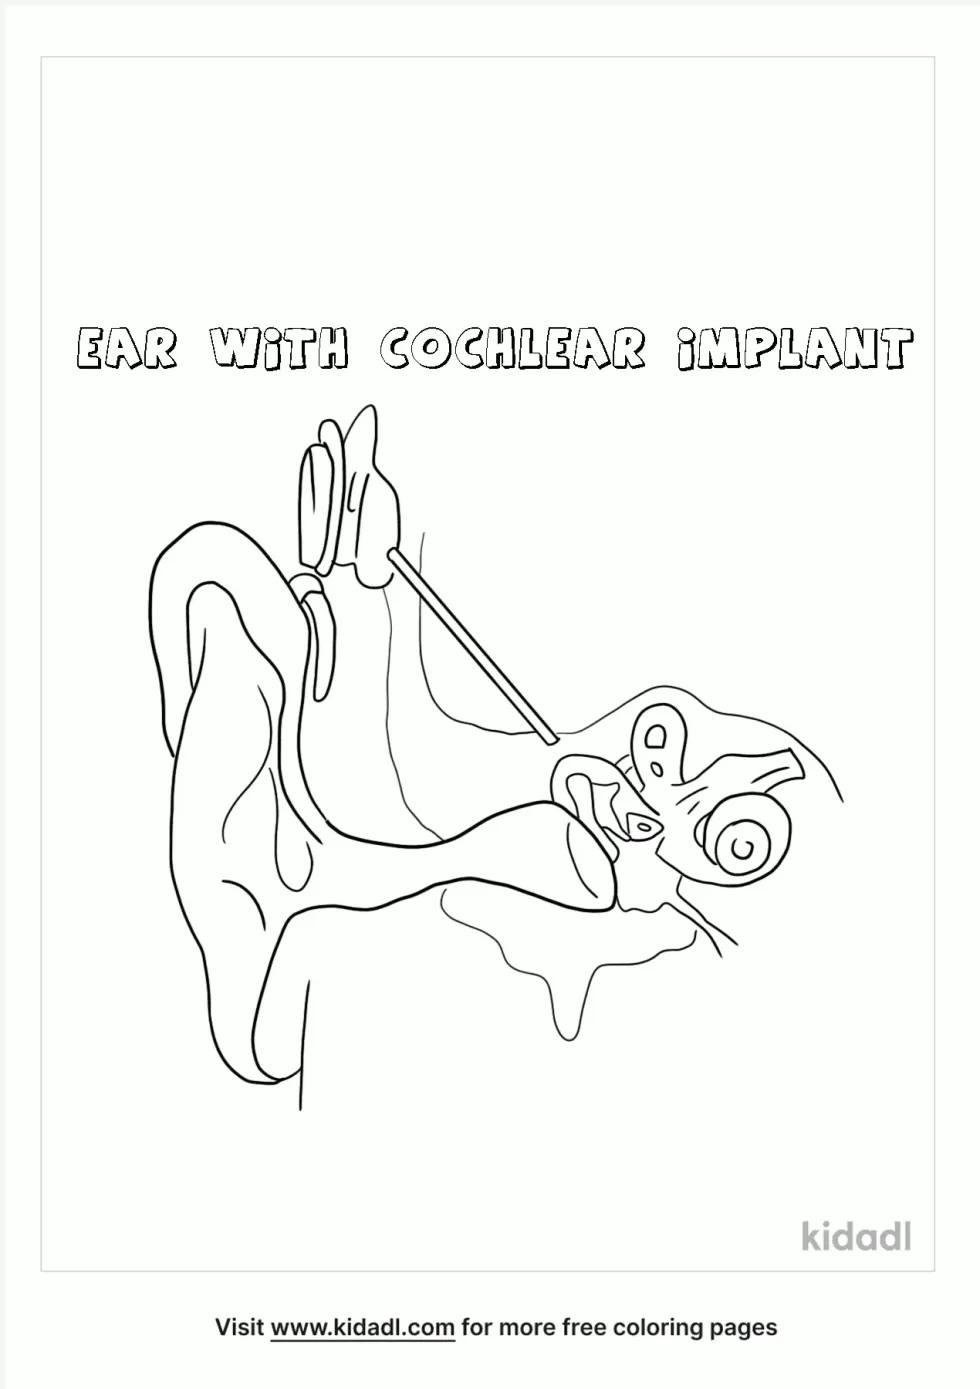 Cochlear Implant Coloring Page